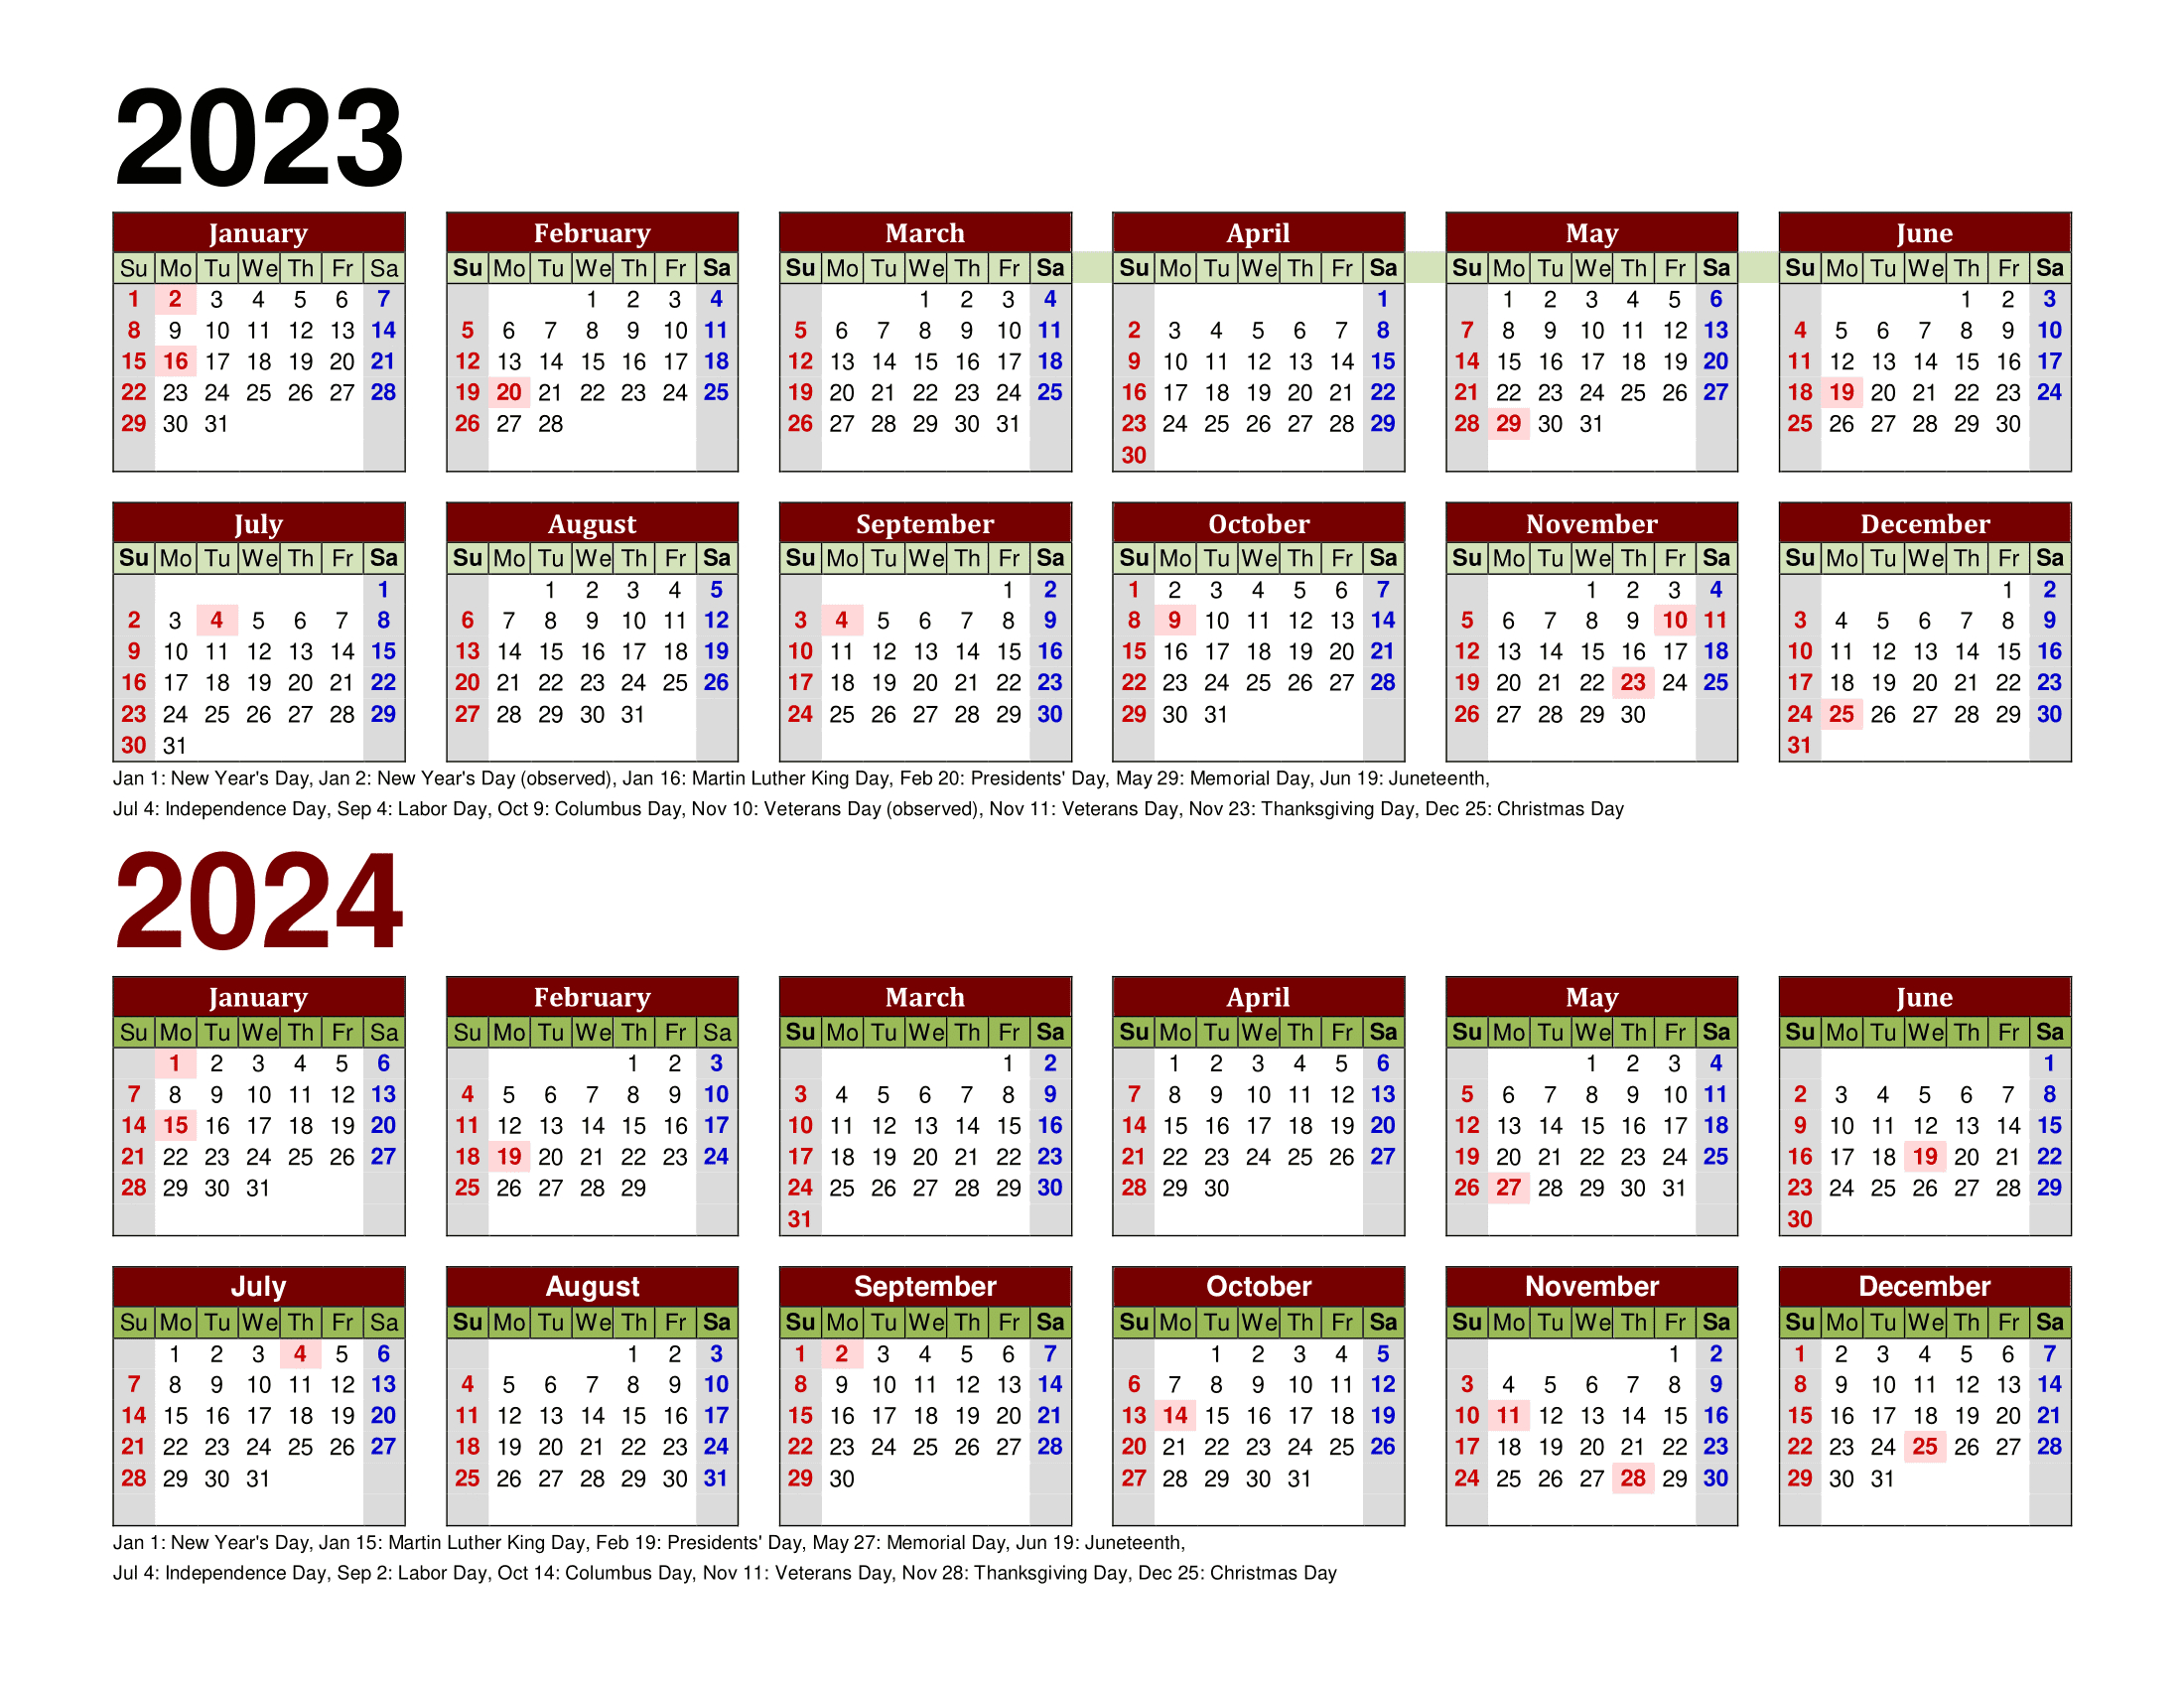 Free Printable Two Year Calendar Templates For 2023 And 2024 In Pdf | 2023 And 2024 Calendar Printable